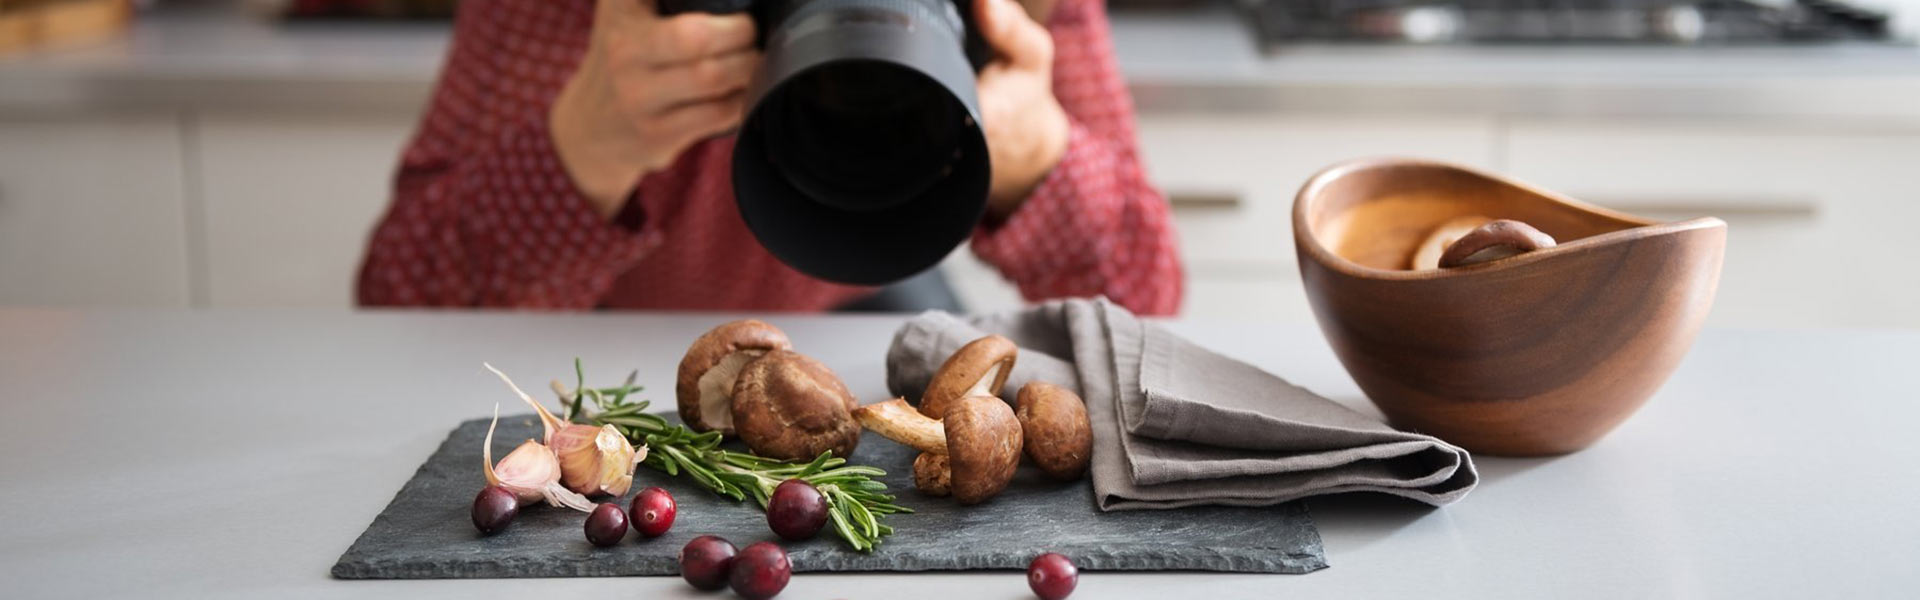 Food photographer taking photo of fresh produce on a board.